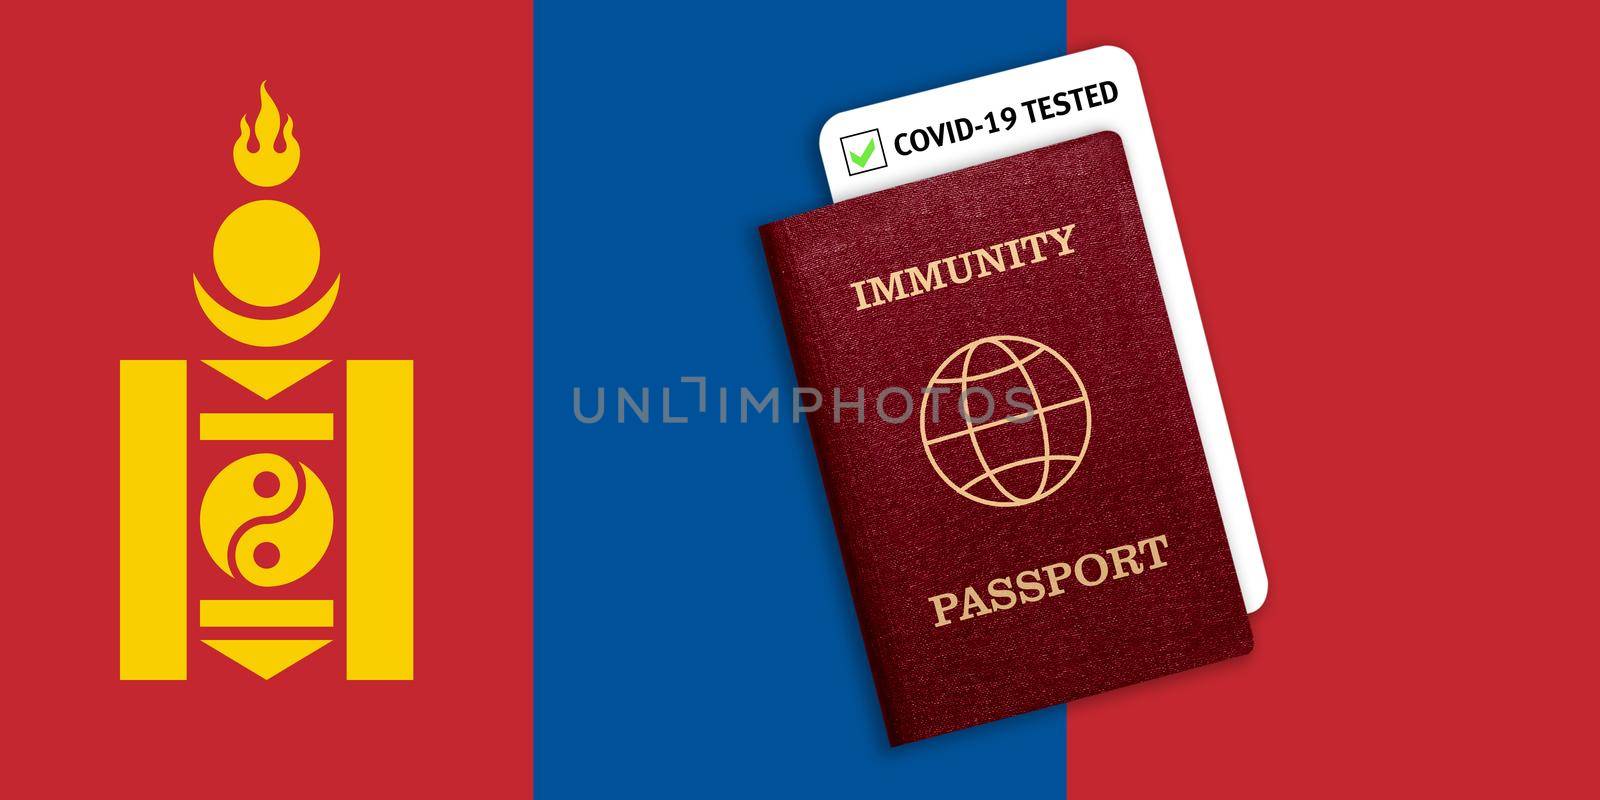 Immunity passport and test result for COVID-19 on flag of Mongolia by galinasharapova